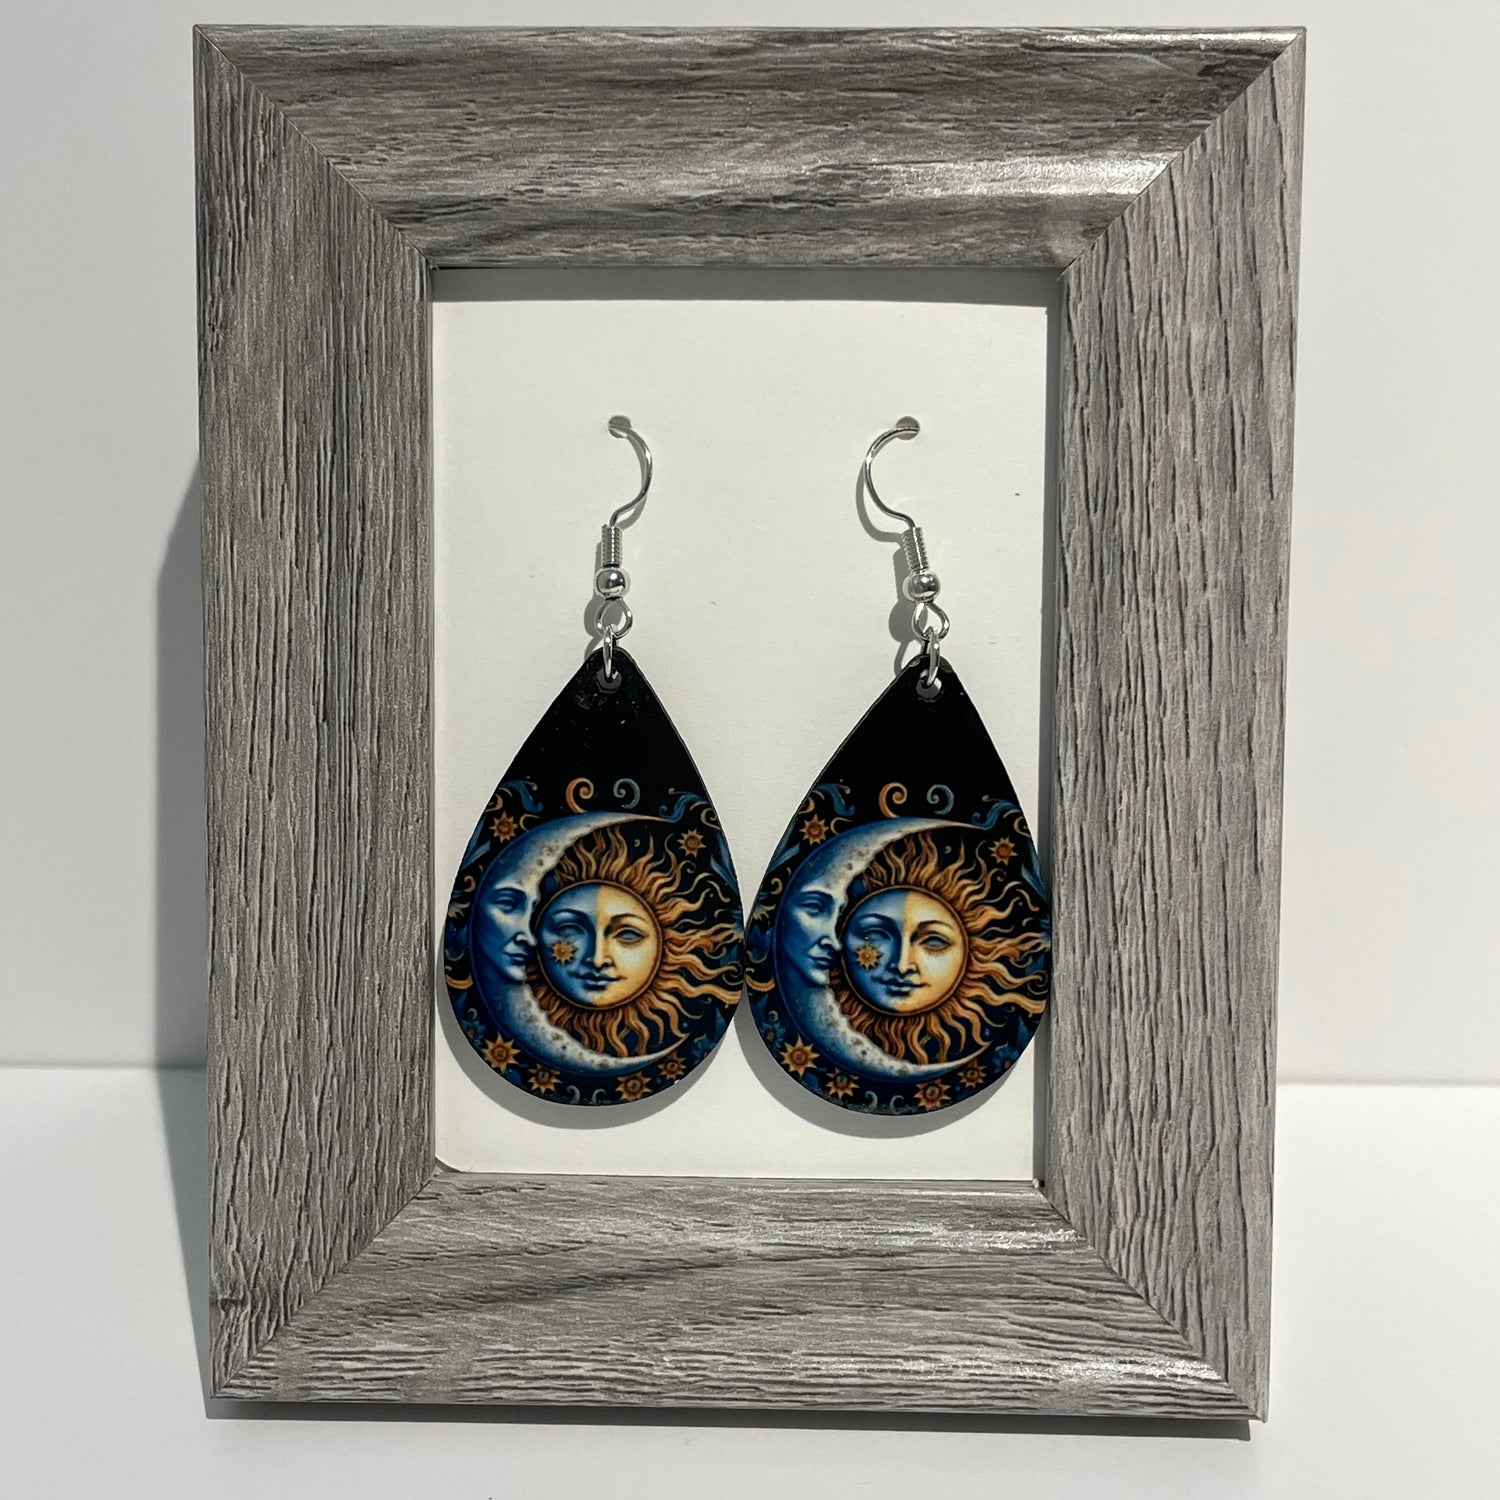 Earrings made from MDF